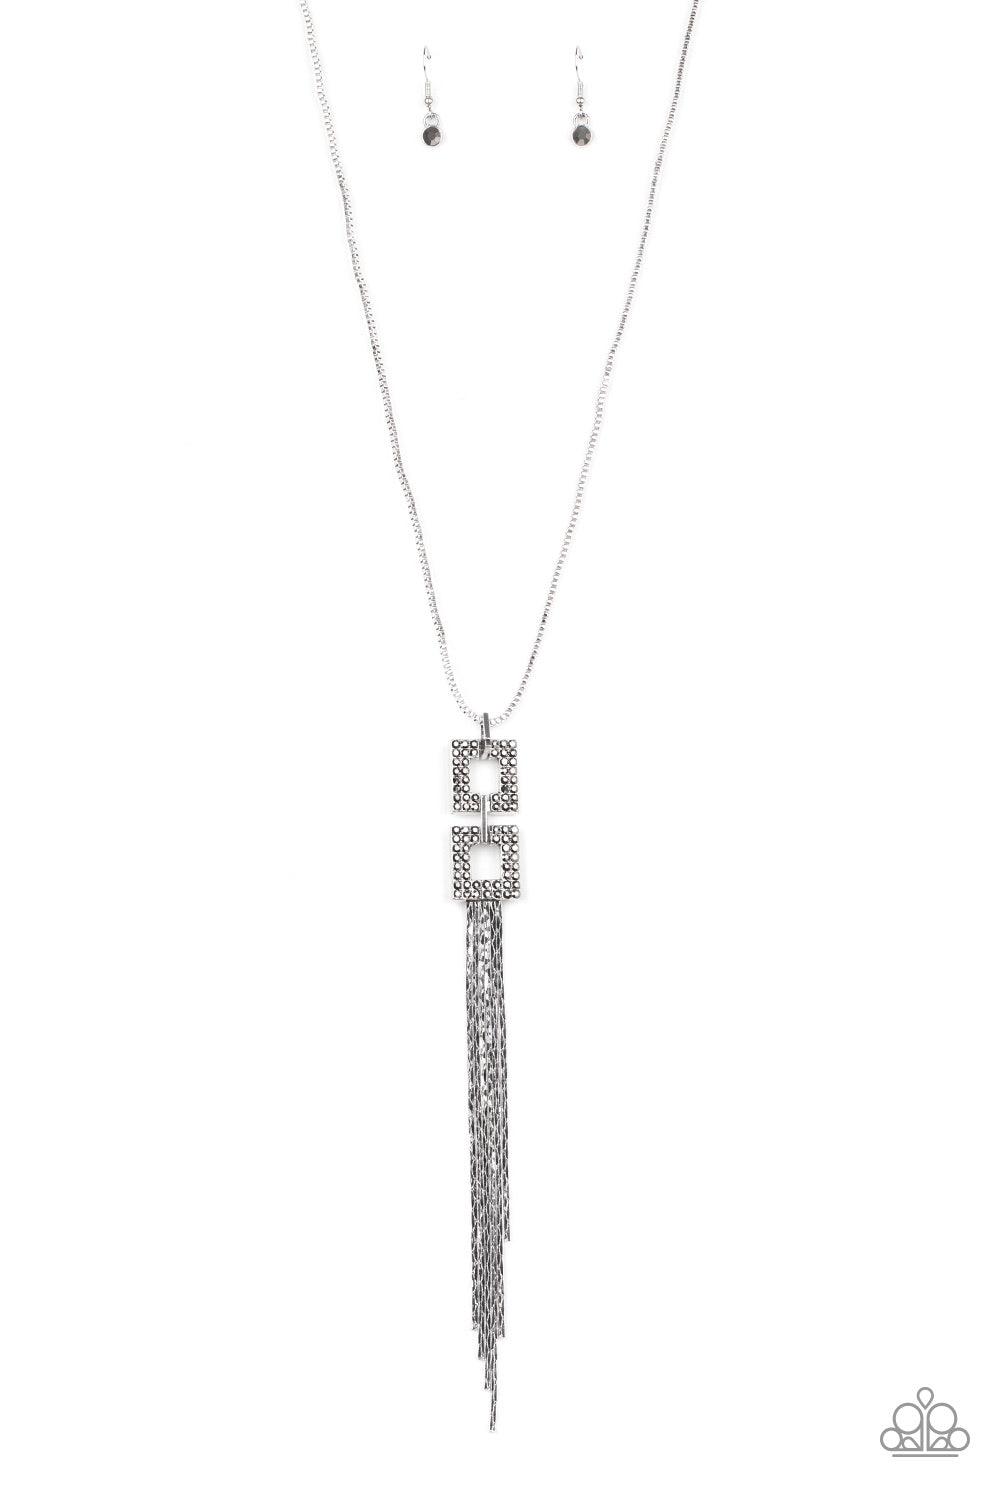 Paparazzi Accessories Times Square Stunner - Silver Encrusted in smoky hematite rhinestones, two squared, silver frames link at the bottom of a lengthened silver box chain. Flattened silver chains stream from the bottom of the stacked pendant, creating an